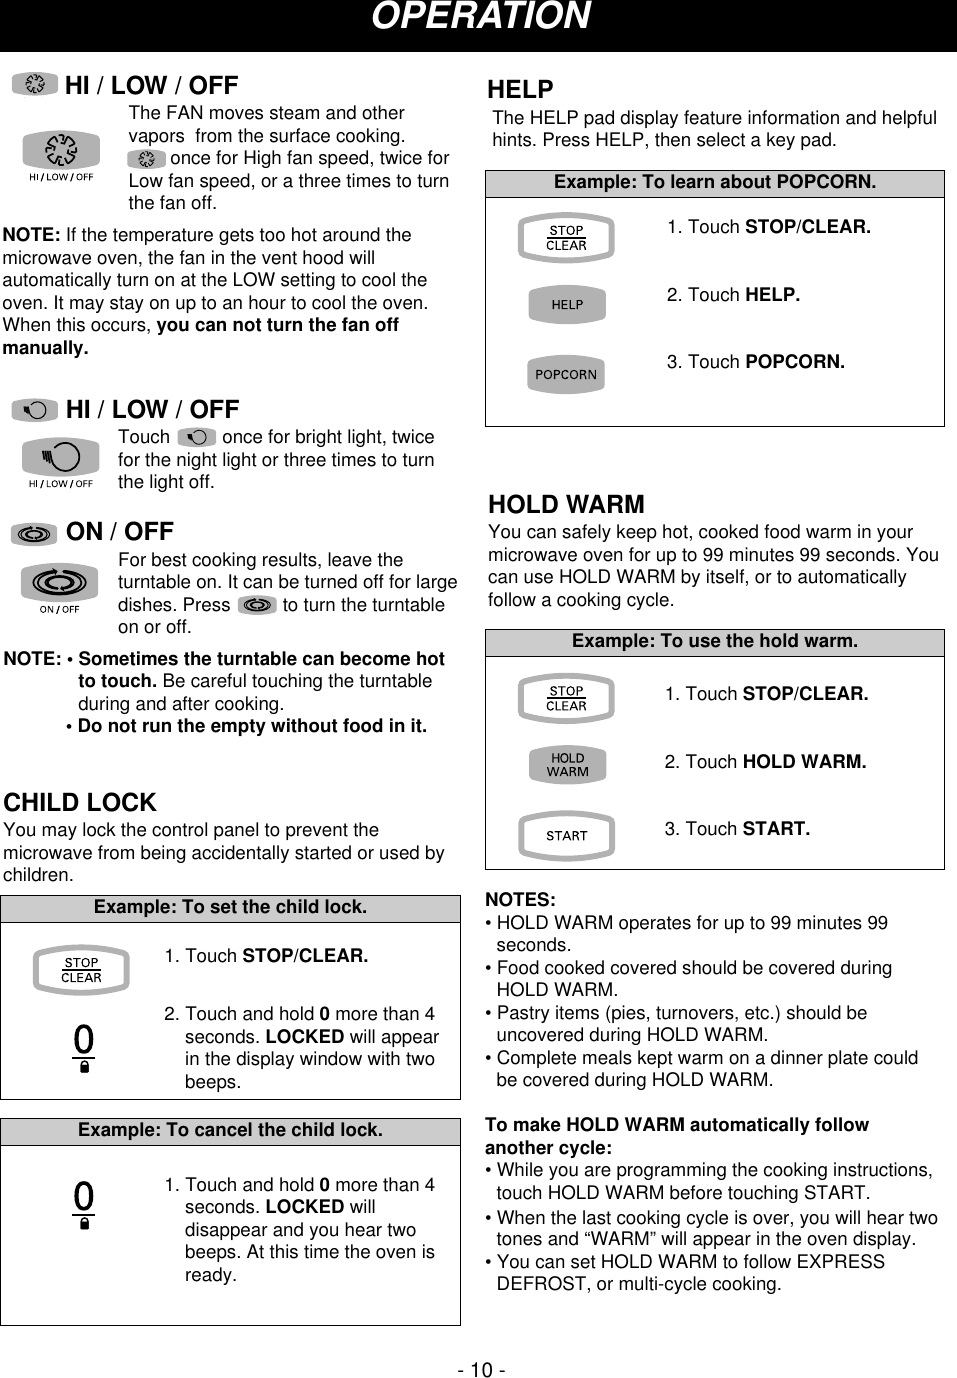 - 10 -CHILD LOCKYou may lock the control panel to prevent themicrowave from being accidentally started or used bychildren.HOLD WARMYou can safely keep hot, cooked food warm in yourmicrowave oven for up to 99 minutes 99 seconds. Youcan use HOLD WARM by itself, or to automaticallyfollow a cooking cycle.NOTES:• HOLD WARM operates for up to 99 minutes 99seconds.• Food cooked covered should be covered duringHOLD WARM.• Pastry items (pies, turnovers, etc.) should beuncovered during HOLD WARM.• Complete meals kept warm on a dinner plate couldbe covered during HOLD WARM.To make HOLD WARM automatically followanother cycle:• While you are programming the cooking instructions,touch HOLD WARM before touching START.  • When the last cooking cycle is over, you will hear twotones and “WARM” will appear in the oven display.• You can set HOLD WARM to follow EXPRESSDEFROST, or multi-cycle cooking.        OPERATION1. Touch STOP/CLEAR.2. Touch and hold 0more than 4seconds. LOCKED will appearin the display window with twobeeps.Example: To set the child lock.1. Touch and hold 0more than 4seconds. LOCKED willdisappear and you hear twobeeps. At this time the oven isready.Example: To cancel the child lock.1. Touch STOP/CLEAR.2. Touch HOLD WARM.3. Touch START.Example: To use the hold warm.ON / OFFFor best cooking results, leave theturntable on. It can be turned off for largedishes. Press          to turn the turntableon or off. NOTE: • Sometimes the turntable can become hotto touch. Be careful touching the turntableduring and after cooking.• Do not run the empty without food in it.HELPThe HELP pad display feature information and helpfulhints. Press HELP, then select a key pad.1. Touch STOP/CLEAR.2. Touch HELP.3. Touch POPCORN.Example: To learn about POPCORN.HI / LOW / OFFThe FAN moves steam and othervapors  from the surface cooking. once for High fan speed, twice forLow fan speed, or a three times to turnthe fan off. NOTE: If the temperature gets too hot around themicrowave oven, the fan in the vent hood willautomatically turn on at the LOW setting to cool theoven. It may stay on up to an hour to cool the oven.When this occurs, you can not turn the fan offmanually.HI / LOW / OFFTouch          once for bright light, twicefor the night light or three times to turnthe light off.